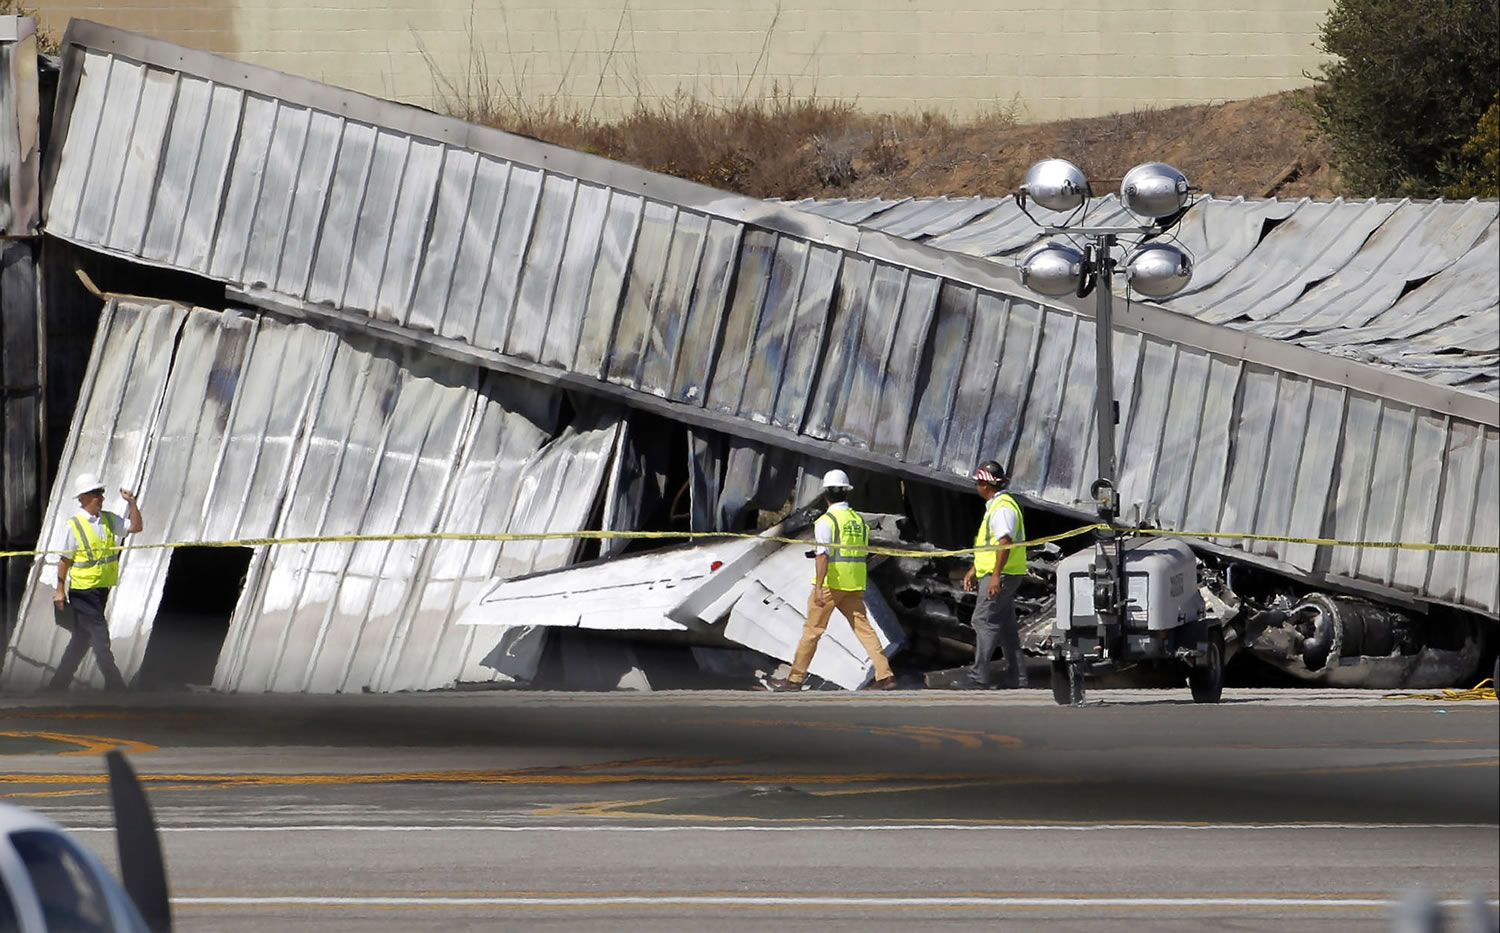 National Transportation Safety Board investigators walk by the tail of a private jet that crashed into a hangar at the Santa Monica Municipal Airport in California, as they await the arrival of a crane to access the plane. As a result of the Oct. 1 federal government partial shutdown, almost all of the board's 400 employees were furloughed, an NTSB spokeswoman said. Across America the government's work is piling up, and it's not just paperwork.